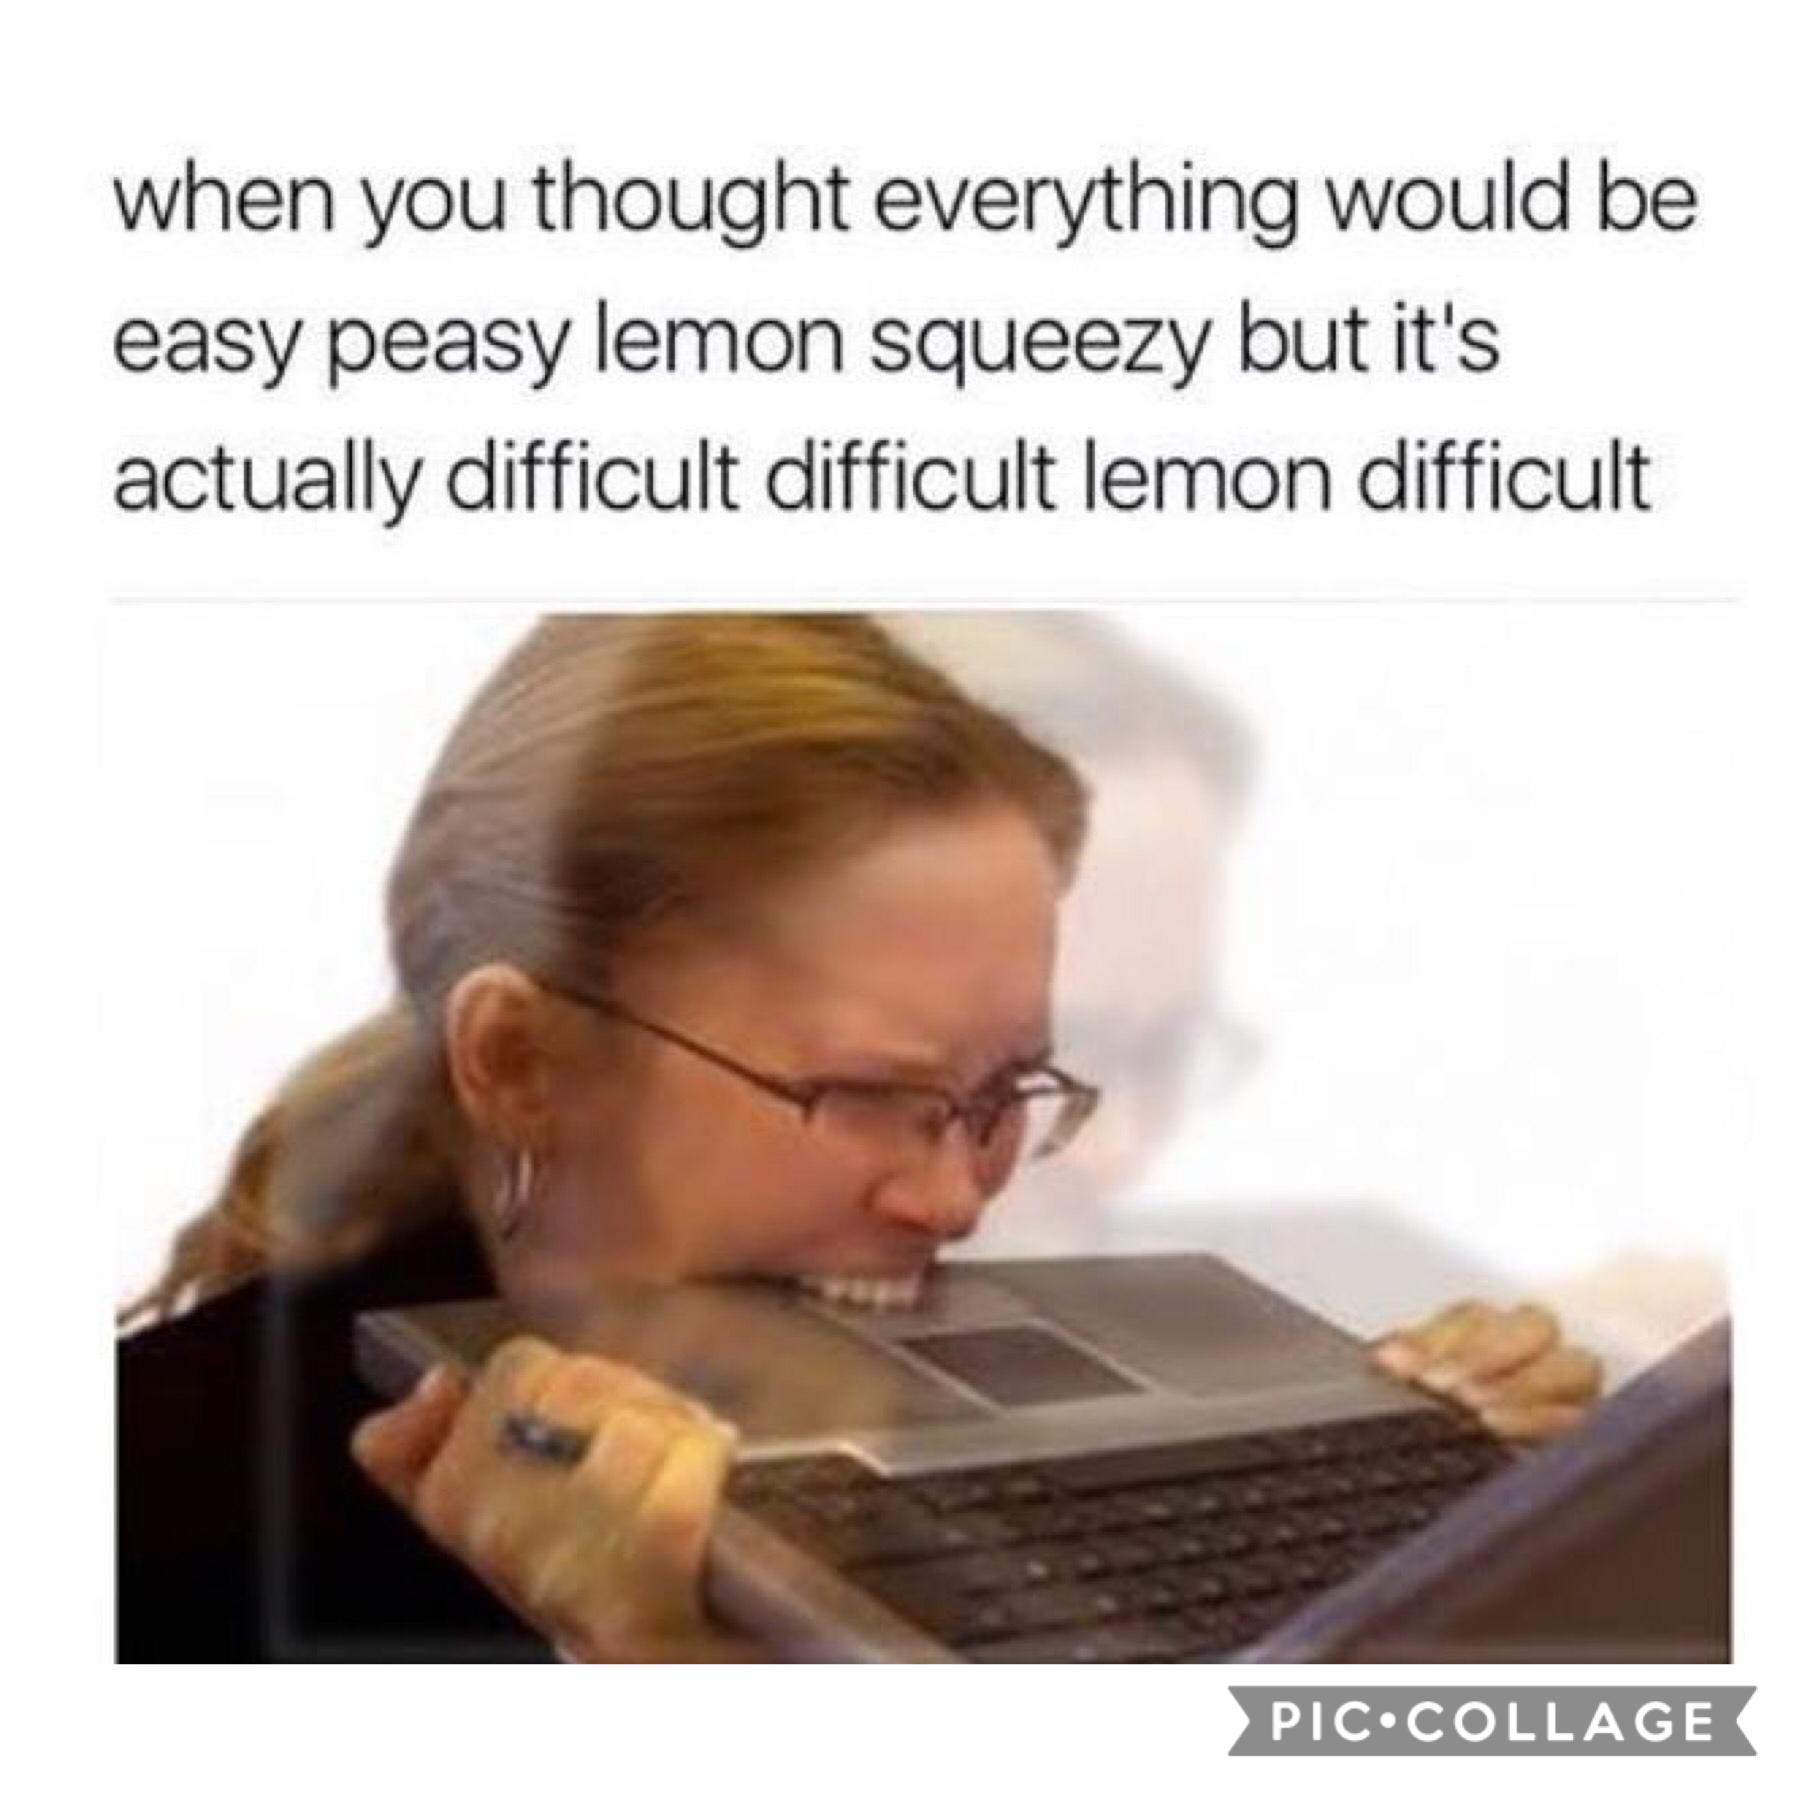 No lemon squeezey!? 
This is a disaster